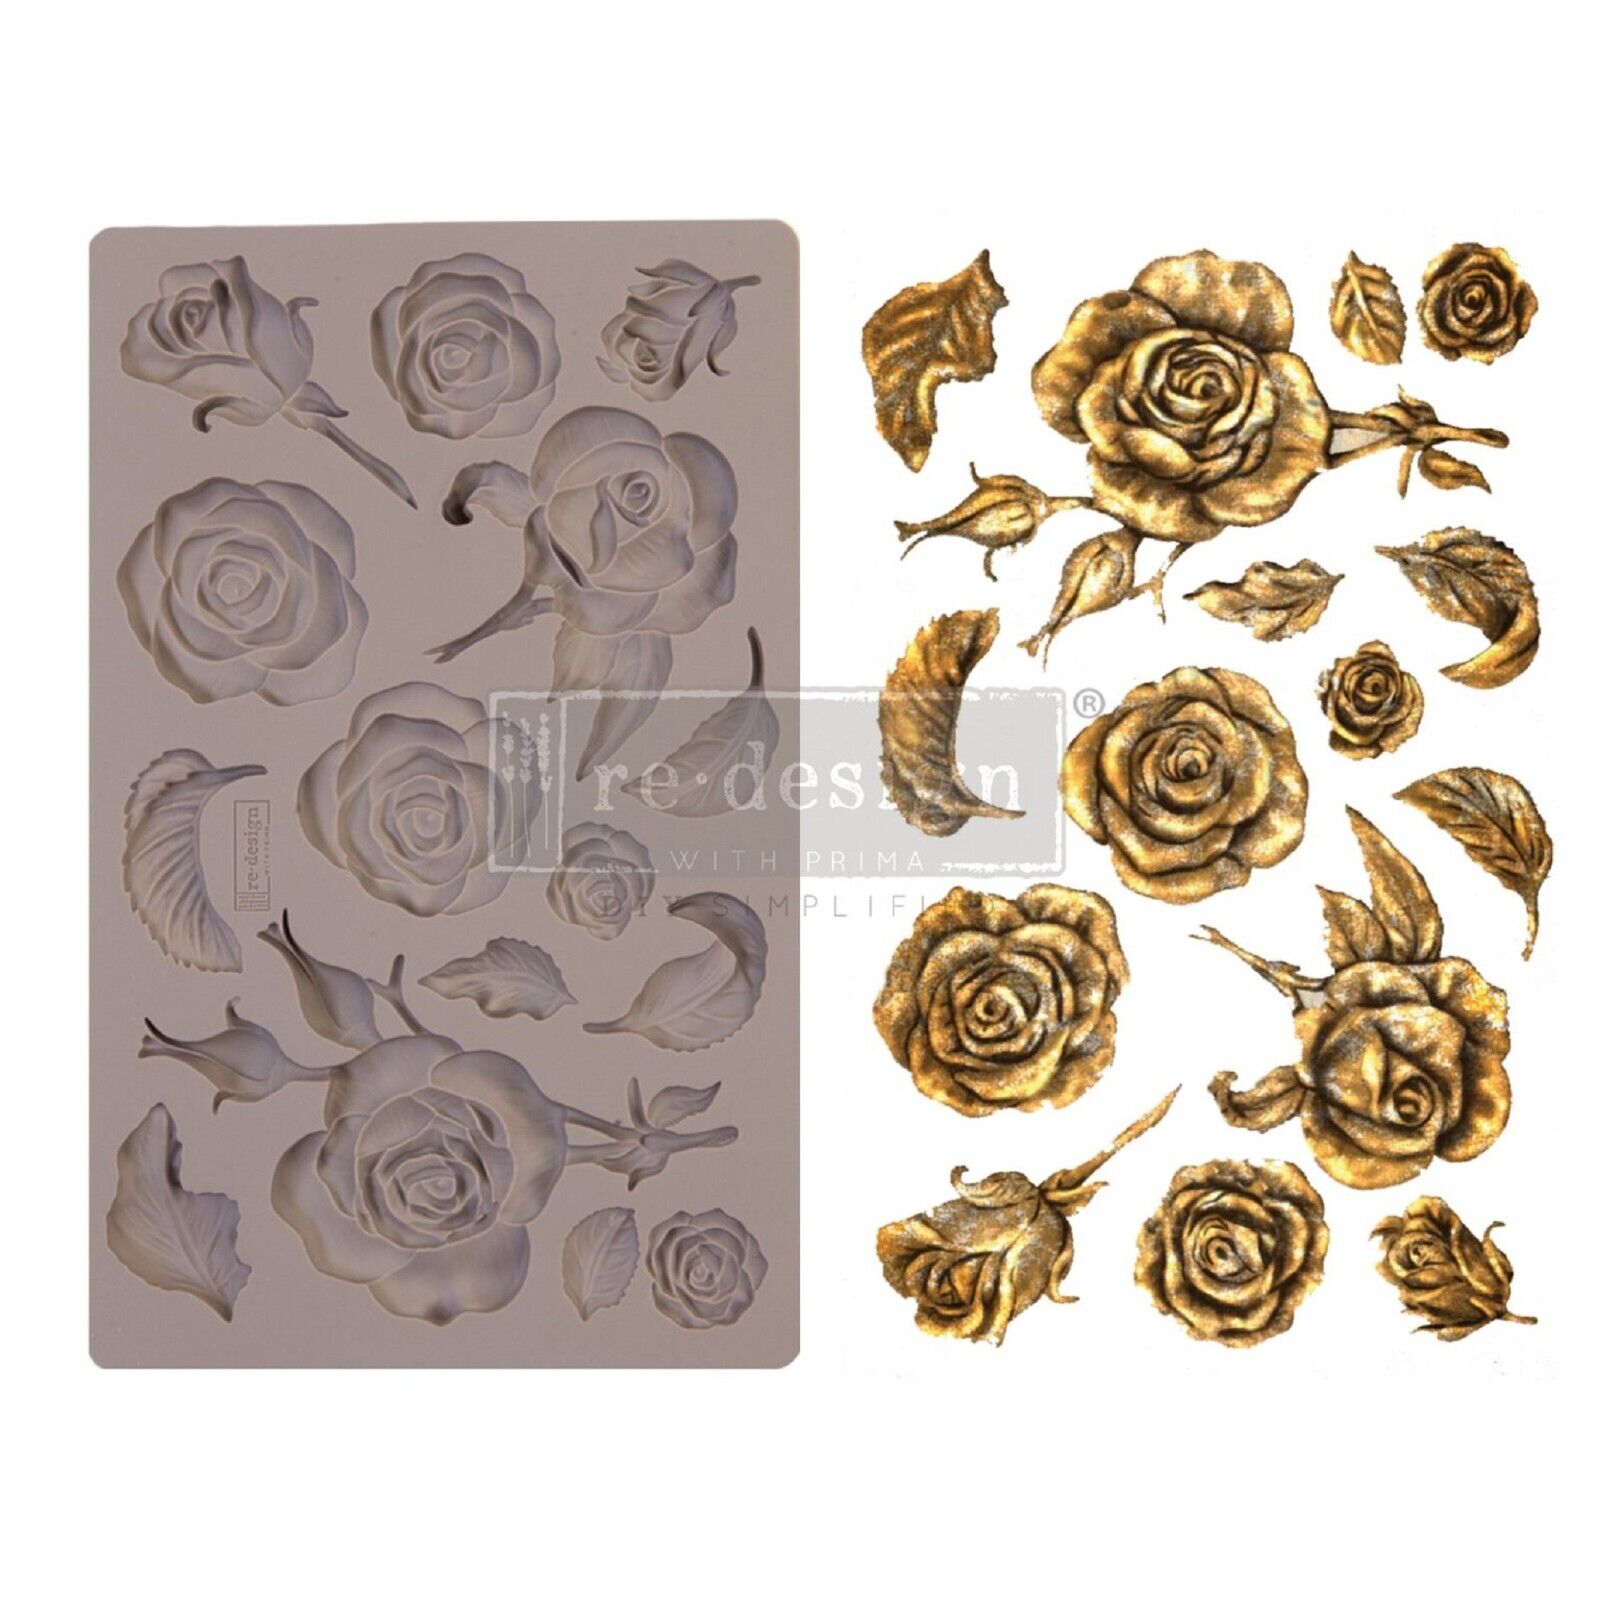 Redesign With Prima Hollybrook Ironwork Decor Mould Silicone Mold 5x8" #632342